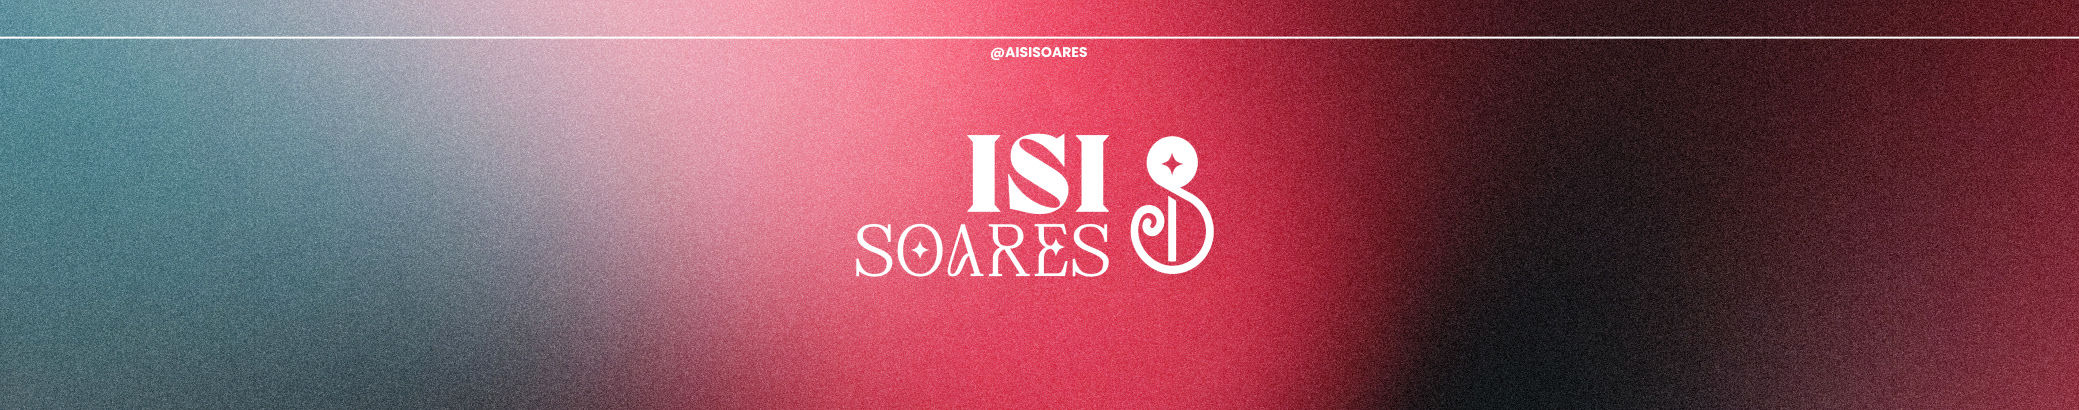 Isi Soares's profile banner